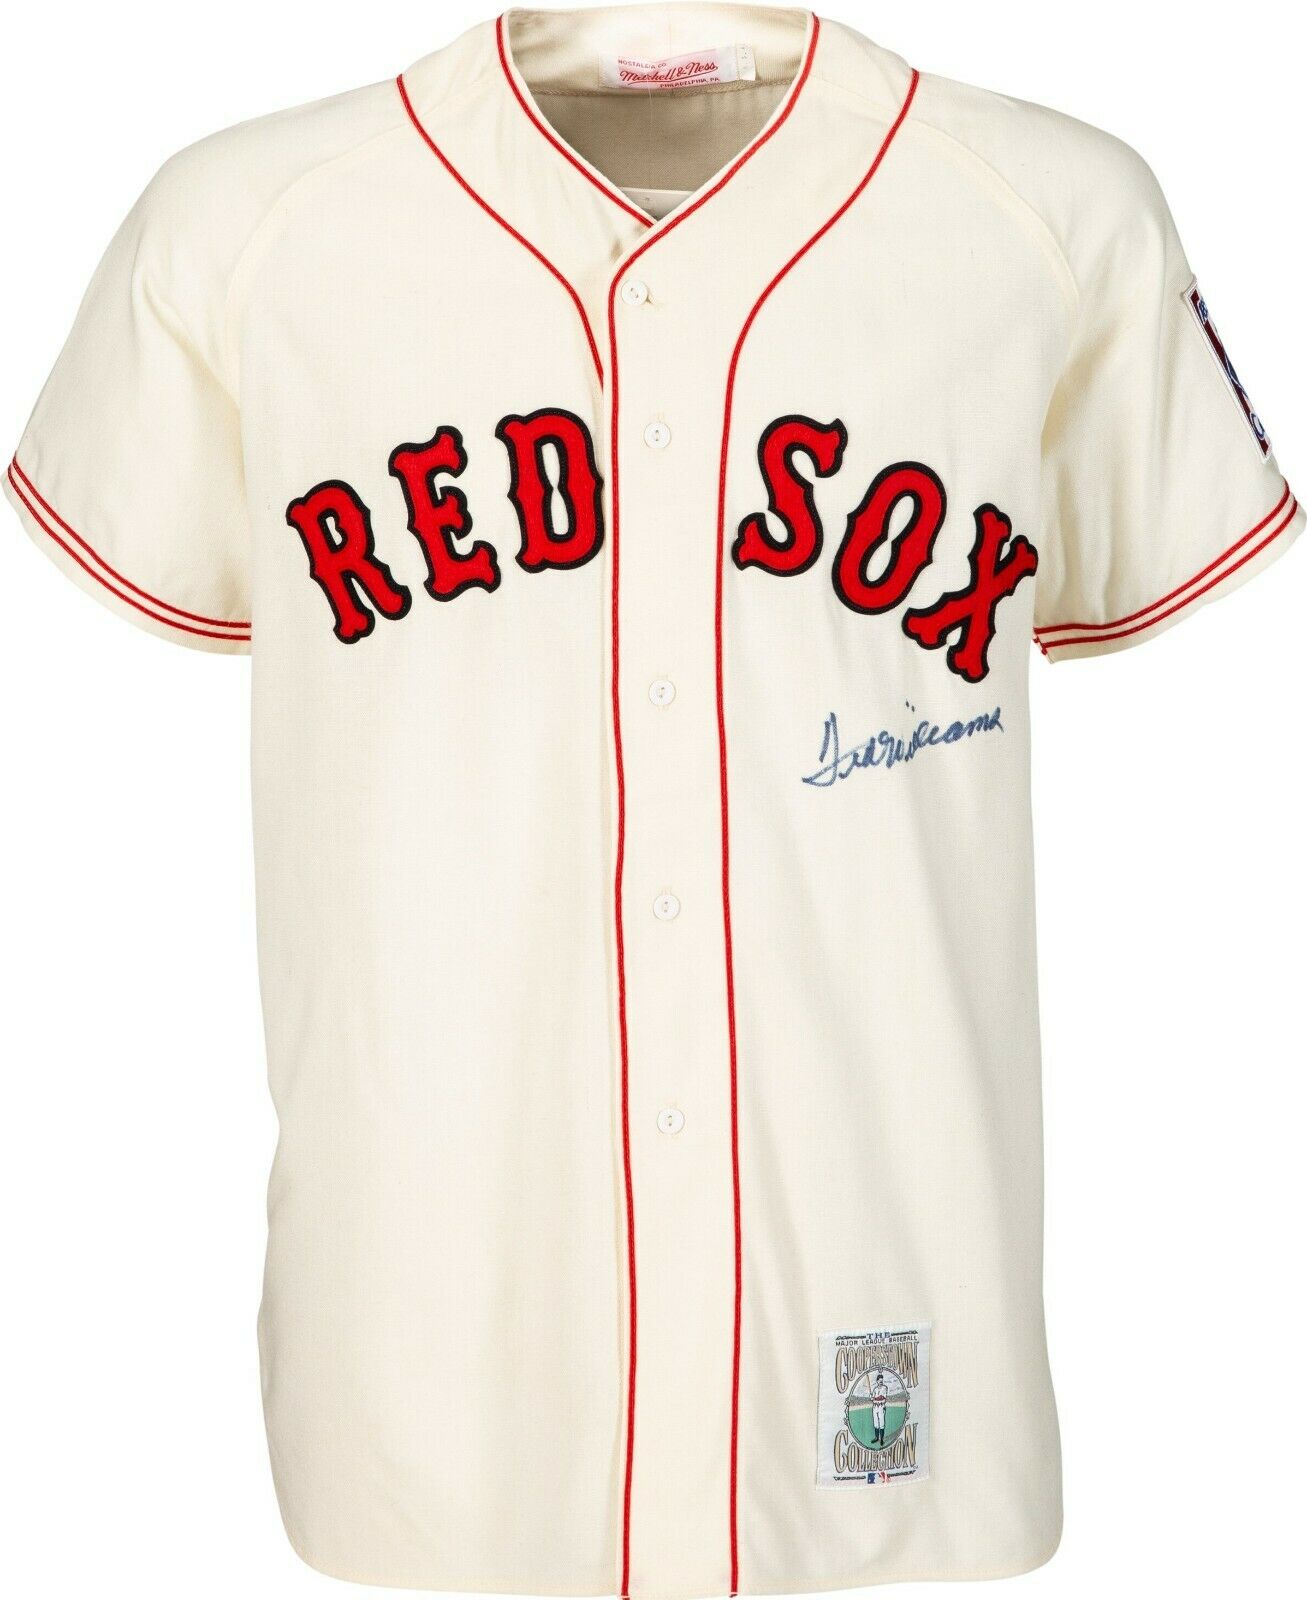 Mitchell and Ness Ted Williams 1939 Boston Red Sox Jersey